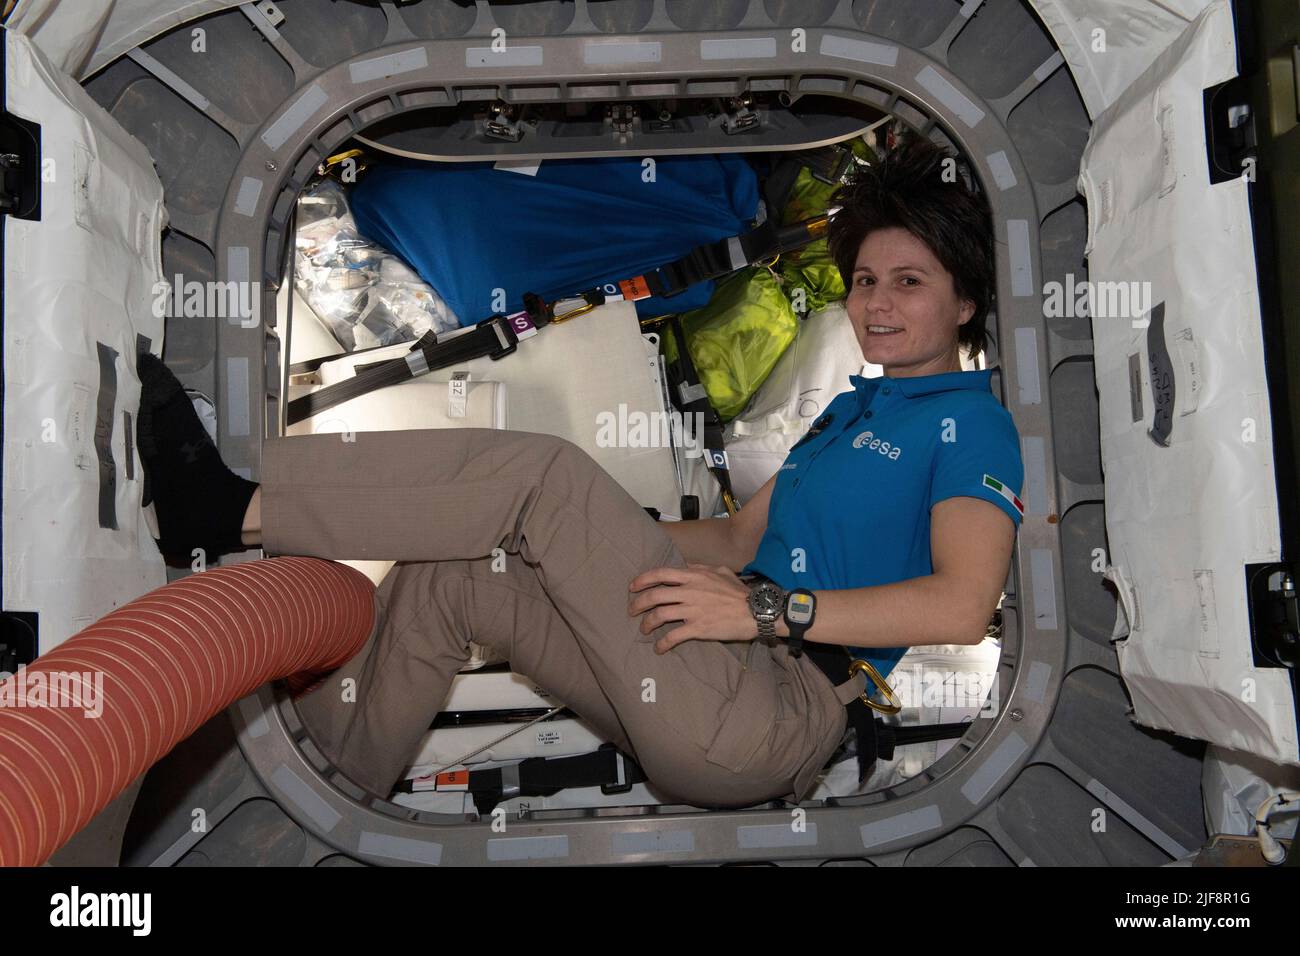 ESA (European Space Agency) astronaut and Expedition 67 Flight Engineer Samantha Cristoforetti is pictured inside the vestibule between the Unity module and the Cygnus space freighter finalizing cargo operations the day before the vehicle's departure from the International Space Station on June 27, 2022. Credit: NASA via CNP Stock Photo